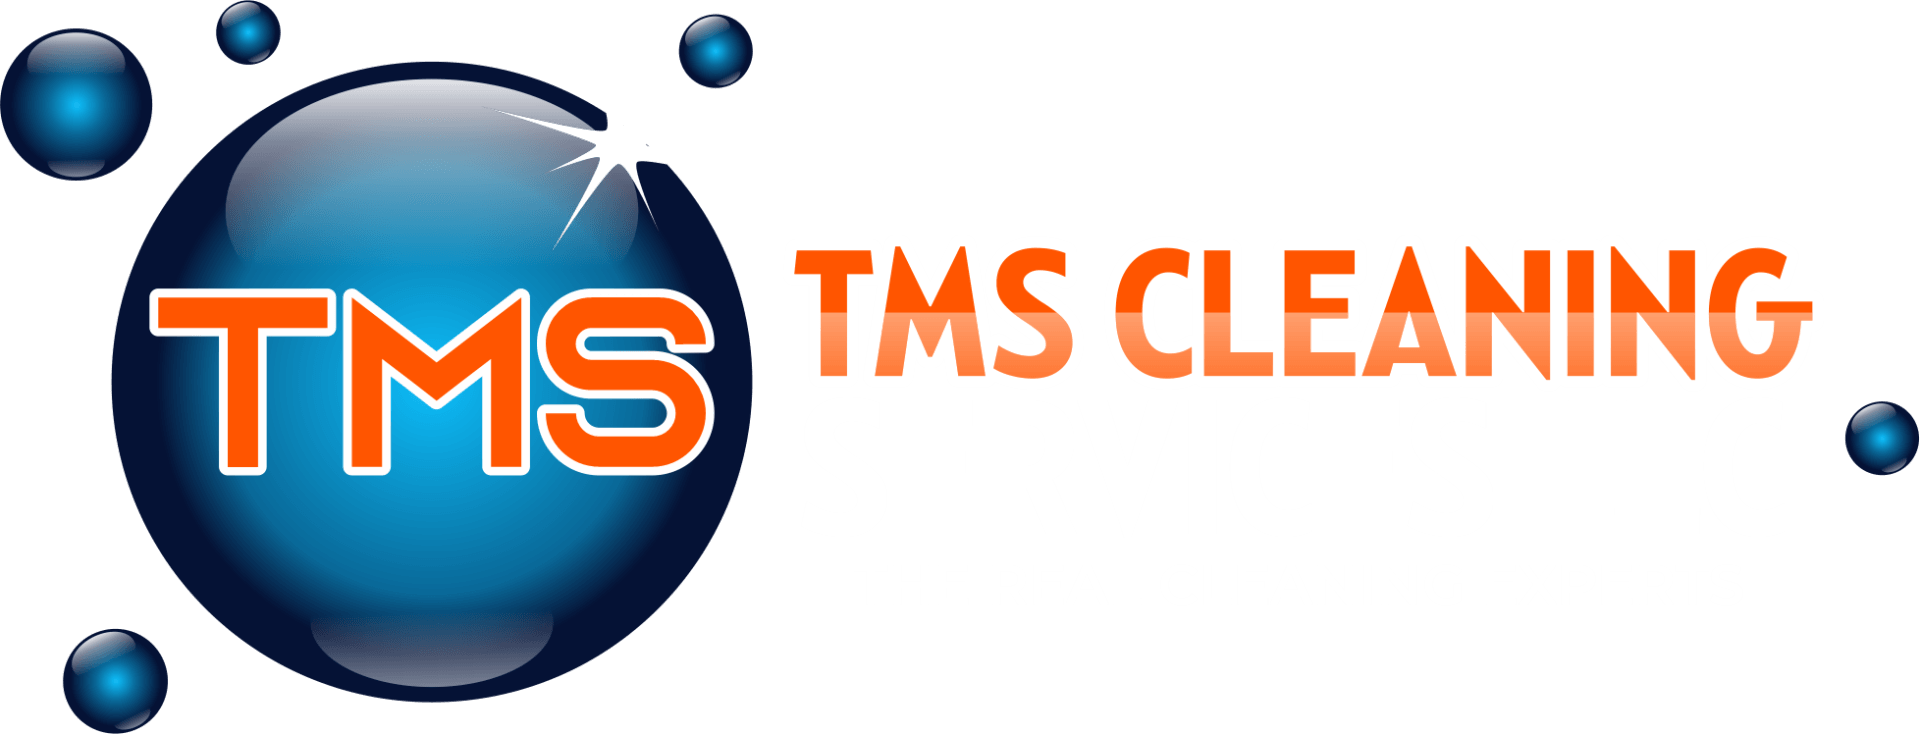 TMS Cleaning Services LLC - logo